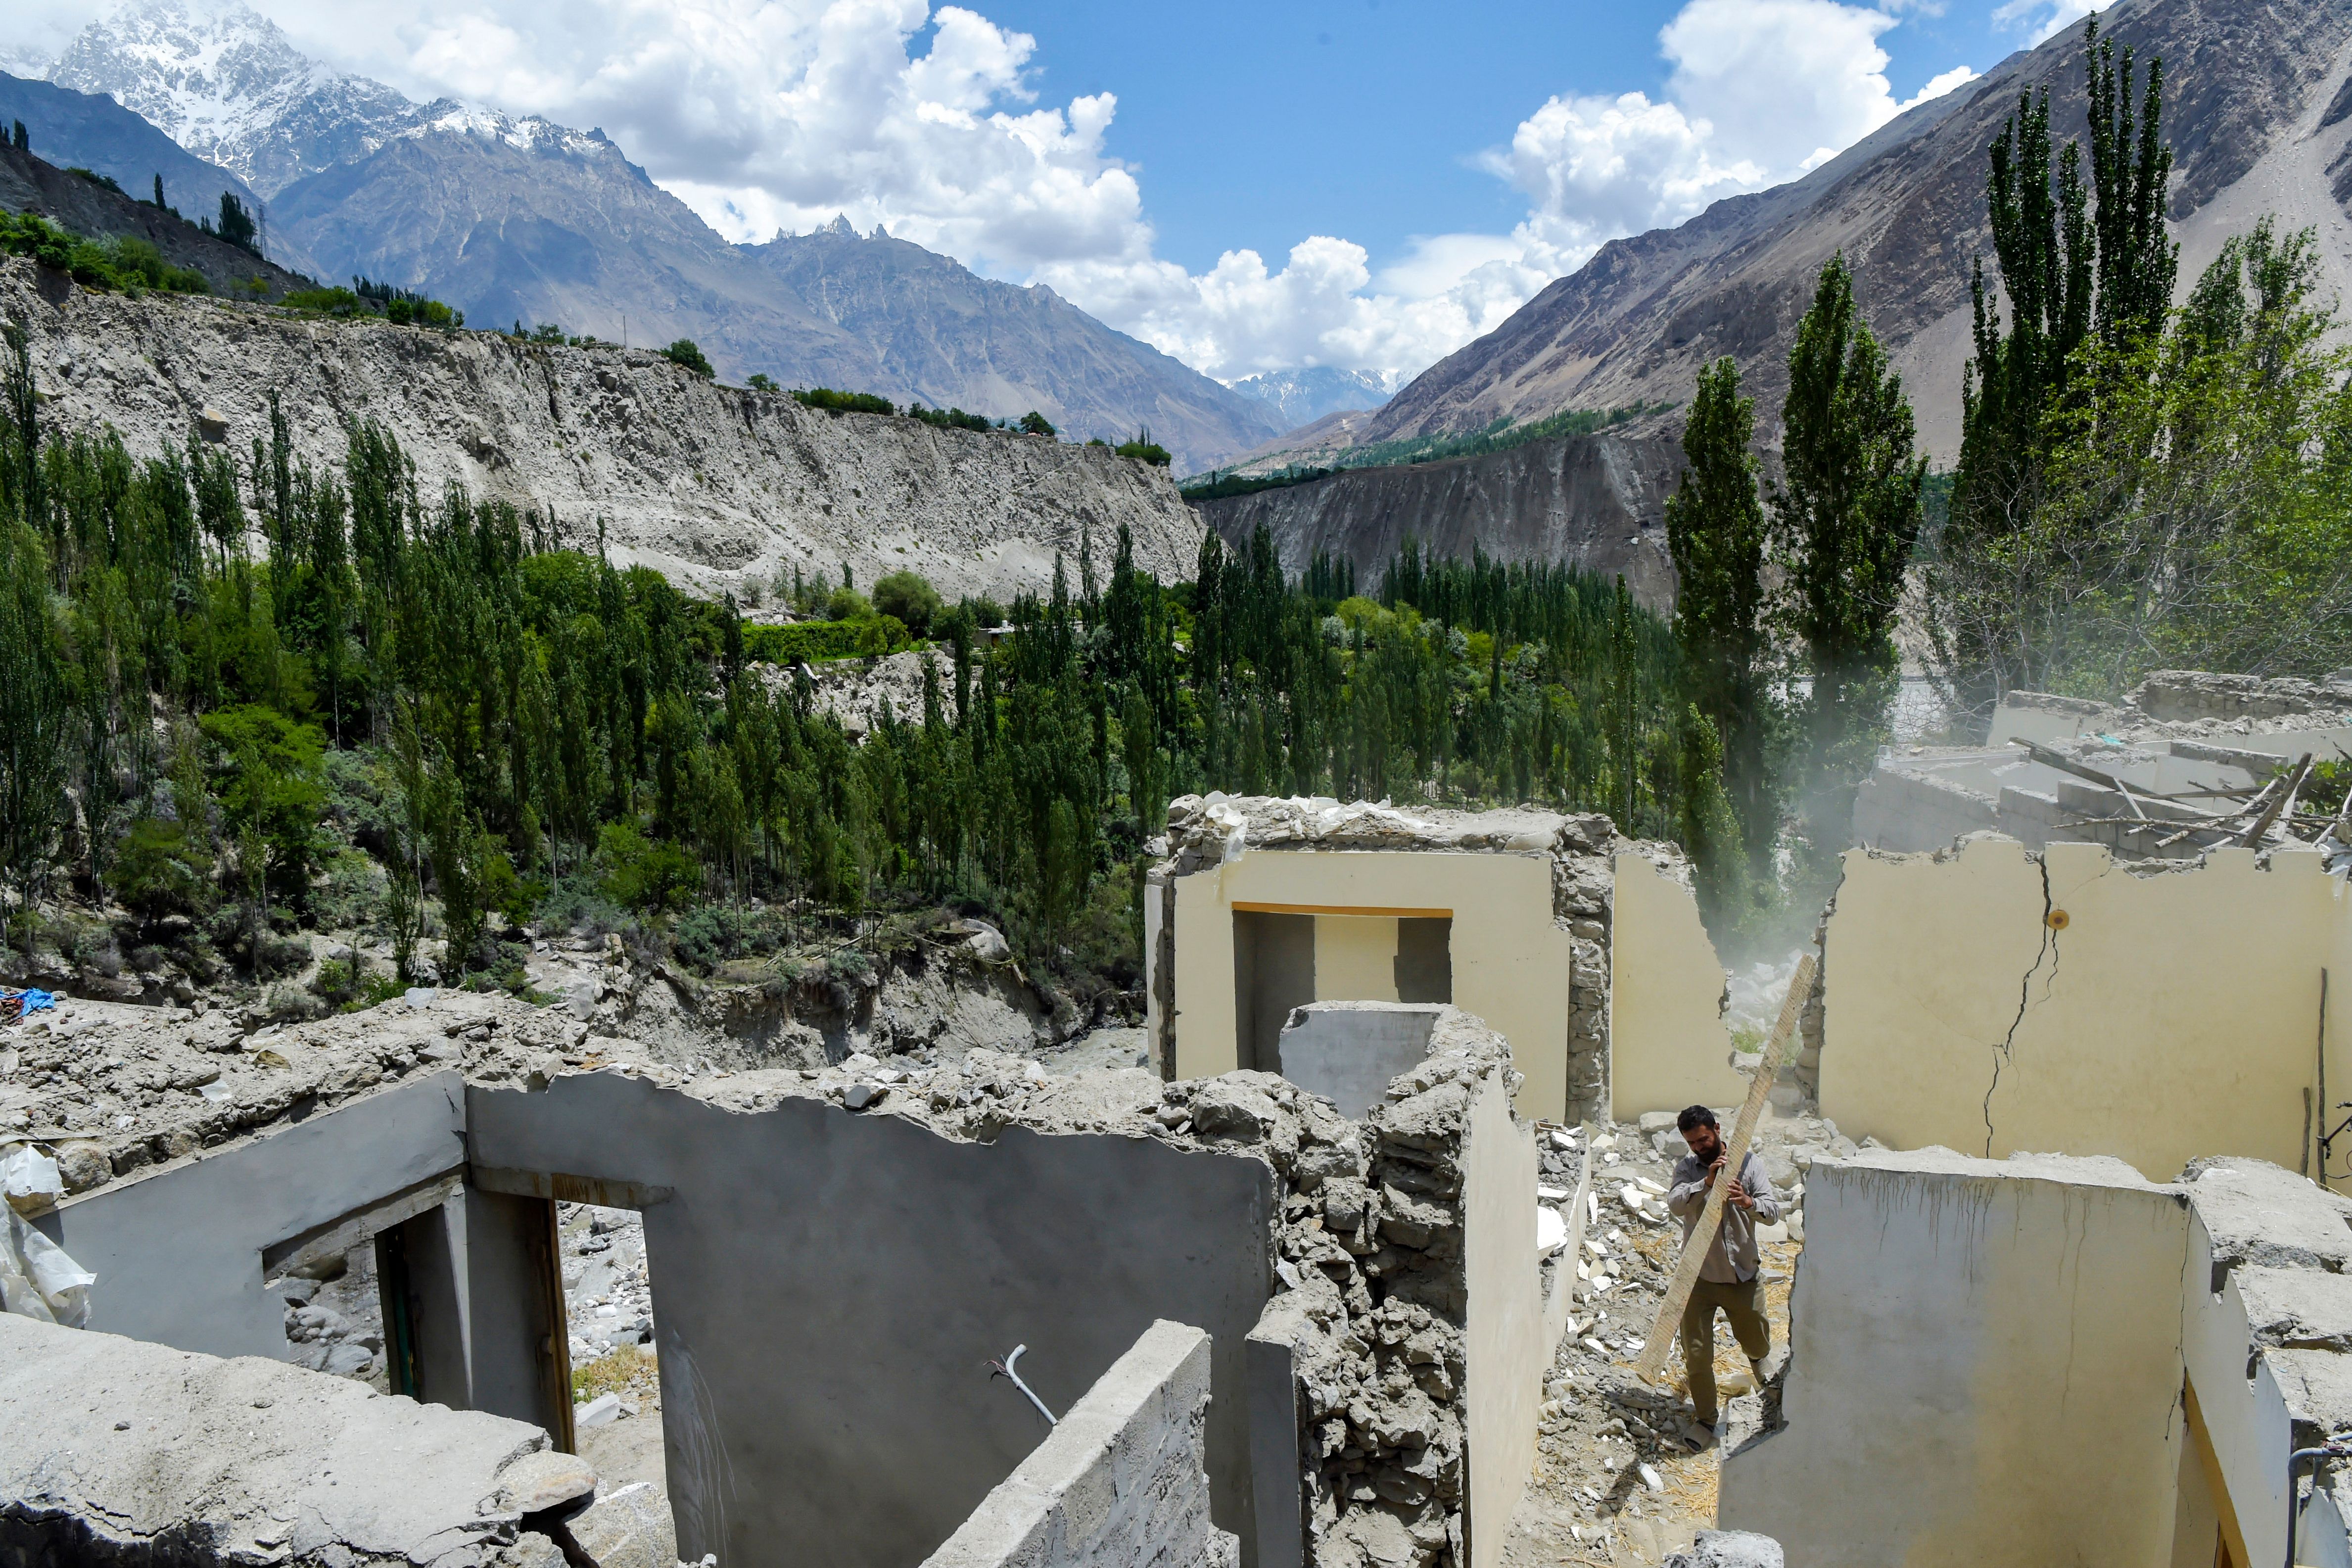 A resident clears debris from a damaged house after a lake outburst because of a melting glacier in Hassanabad village of Pakistan’s Gilgit-Baltistan region in June this year